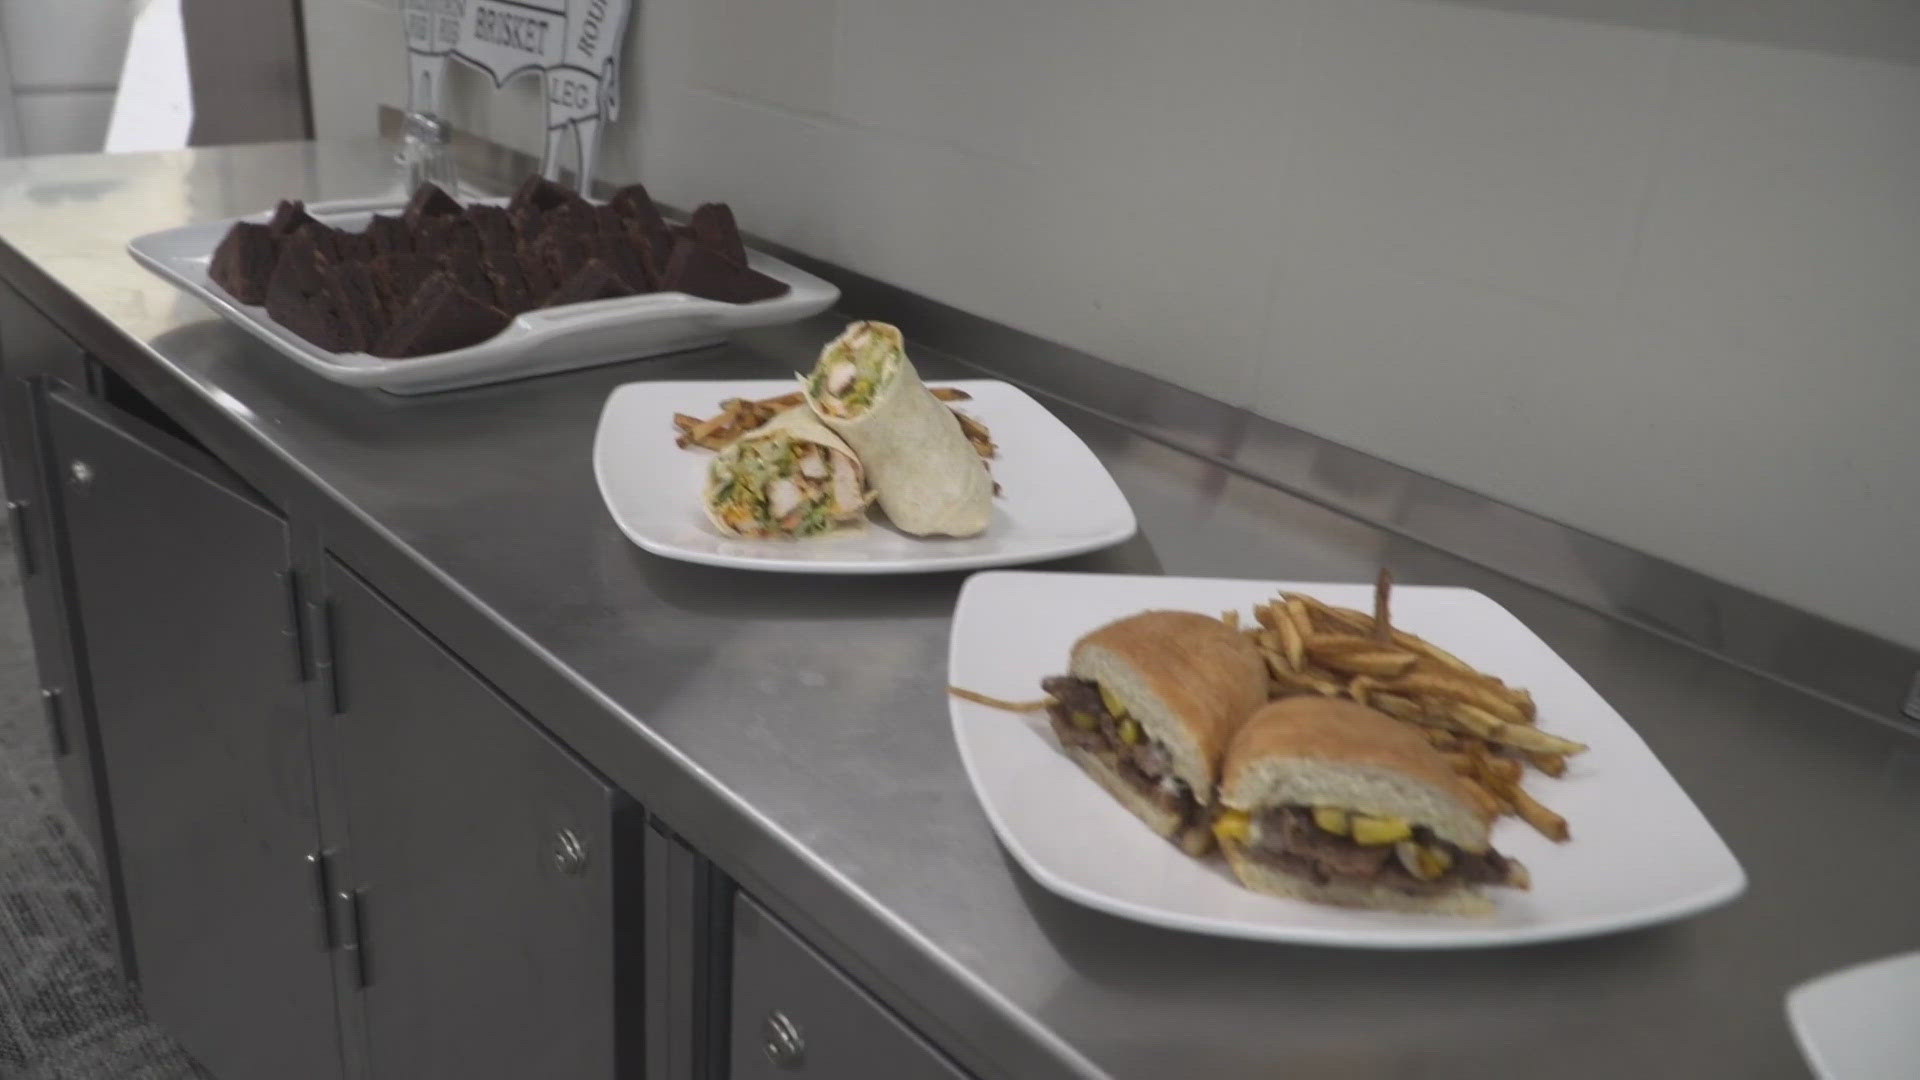 Culinary arts students in Akron, have created a series of pop-up restaurants to test their cooking skills and serve teachers and the public.